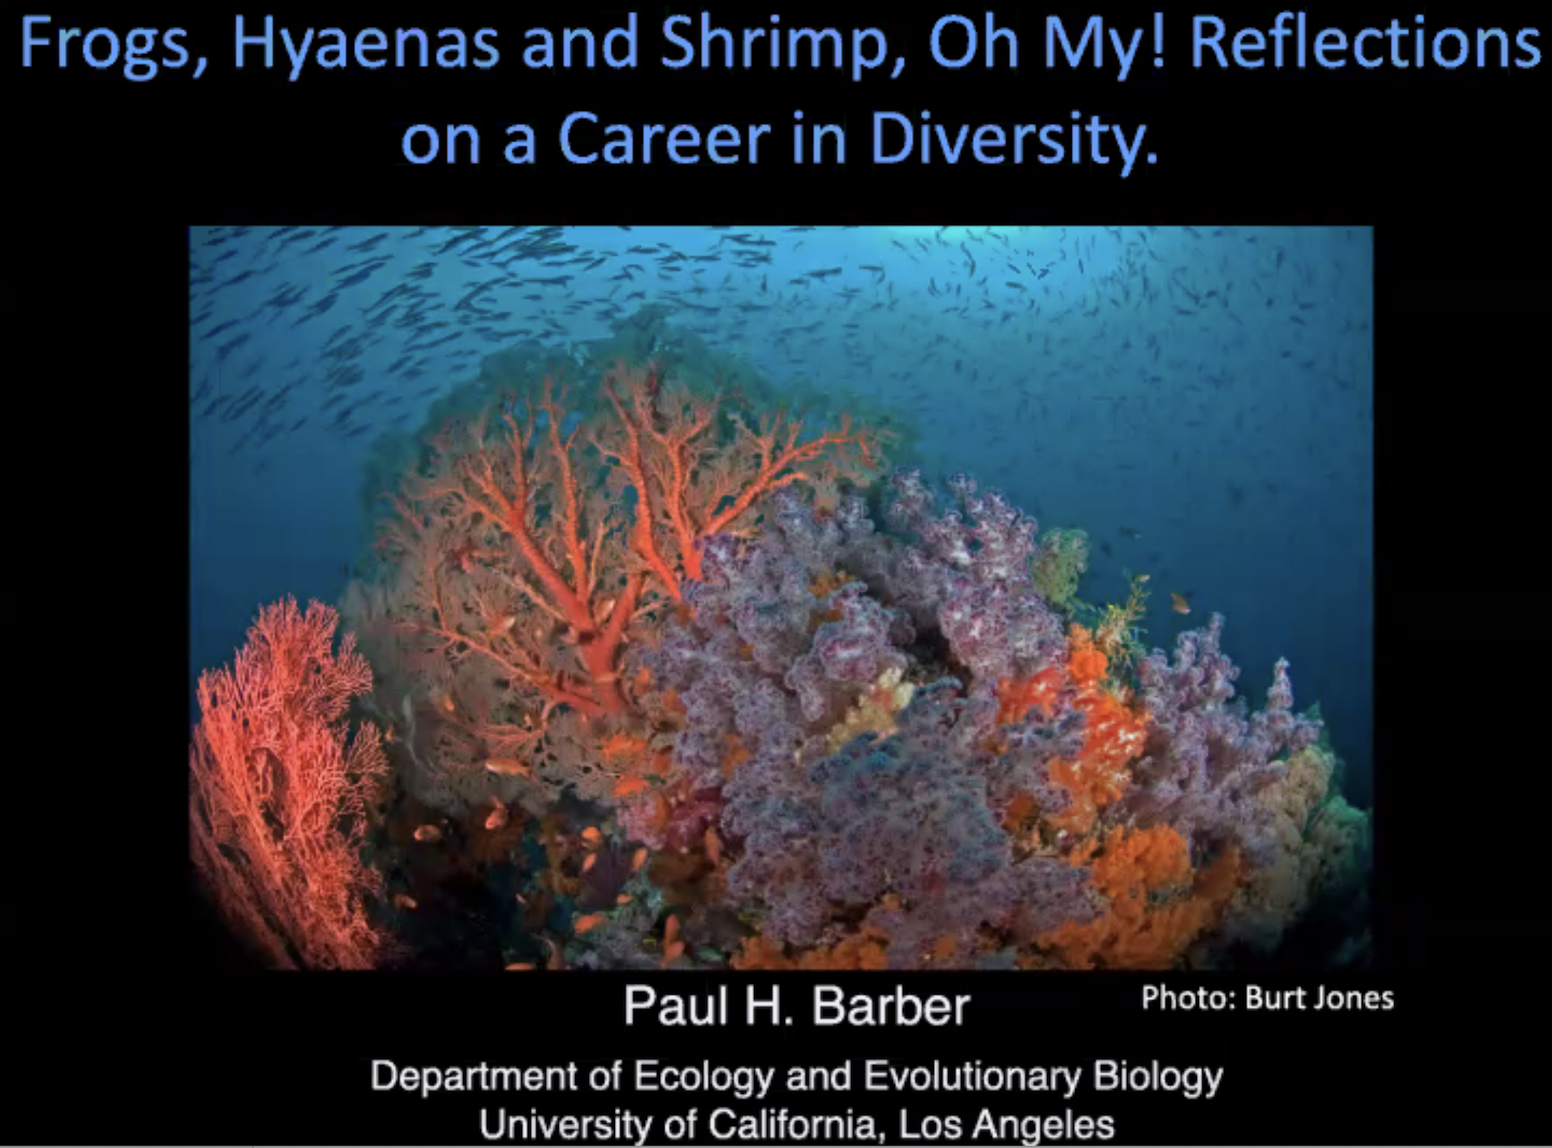 Frogs, Hyaenas and Shrimp, Oh My!  Reflections on a Career in a Diversity